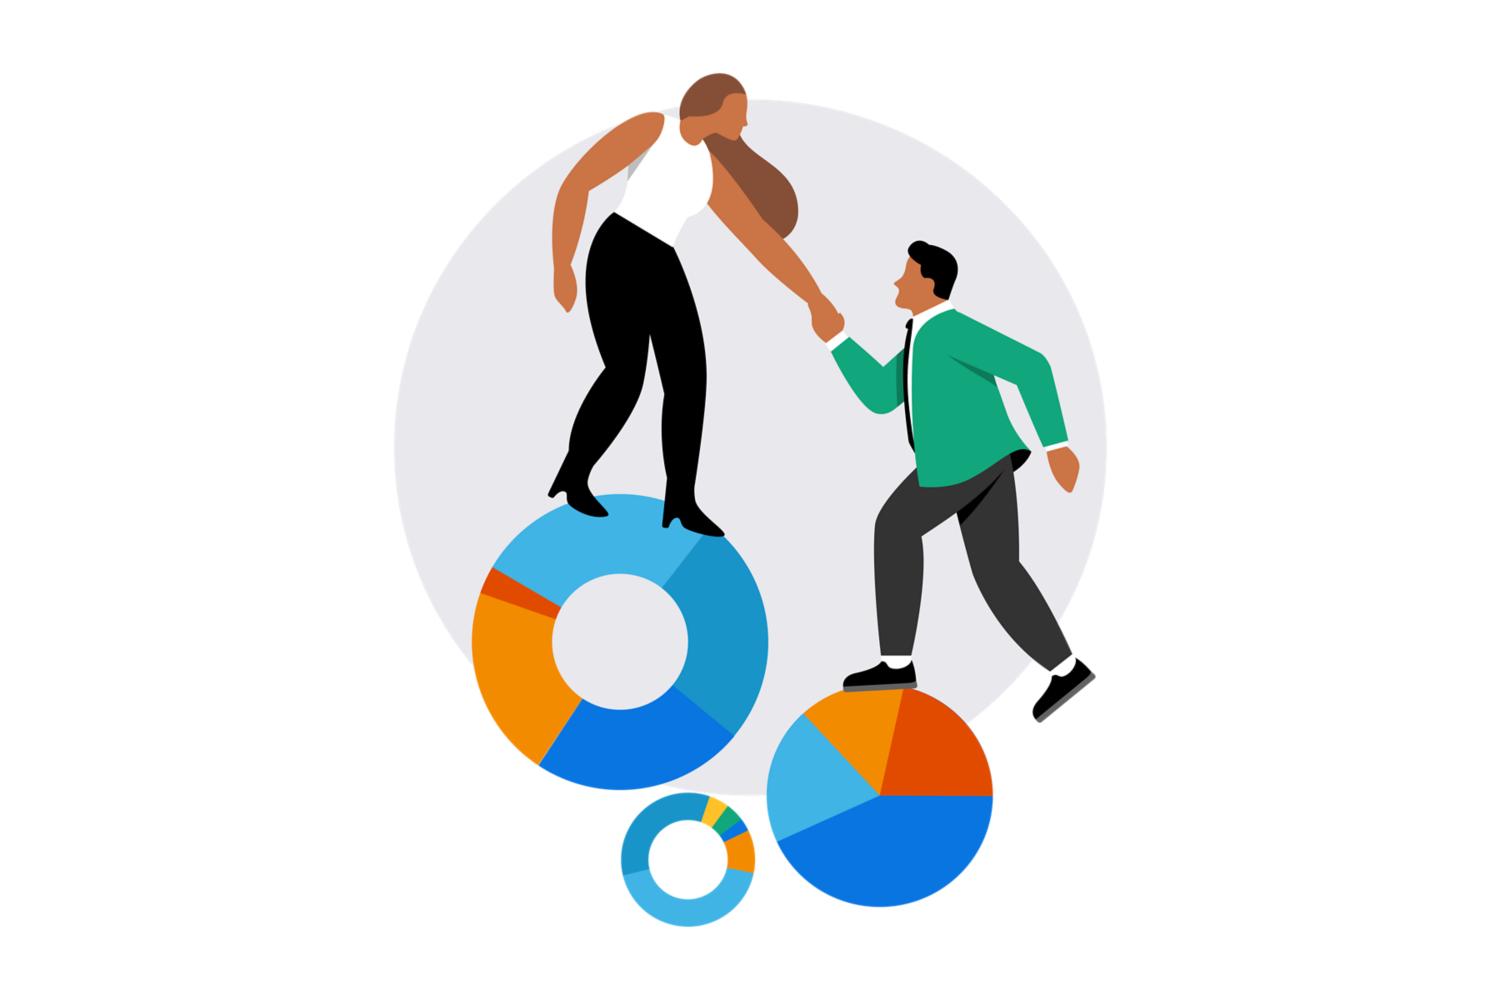 Two people climbing pie charts.